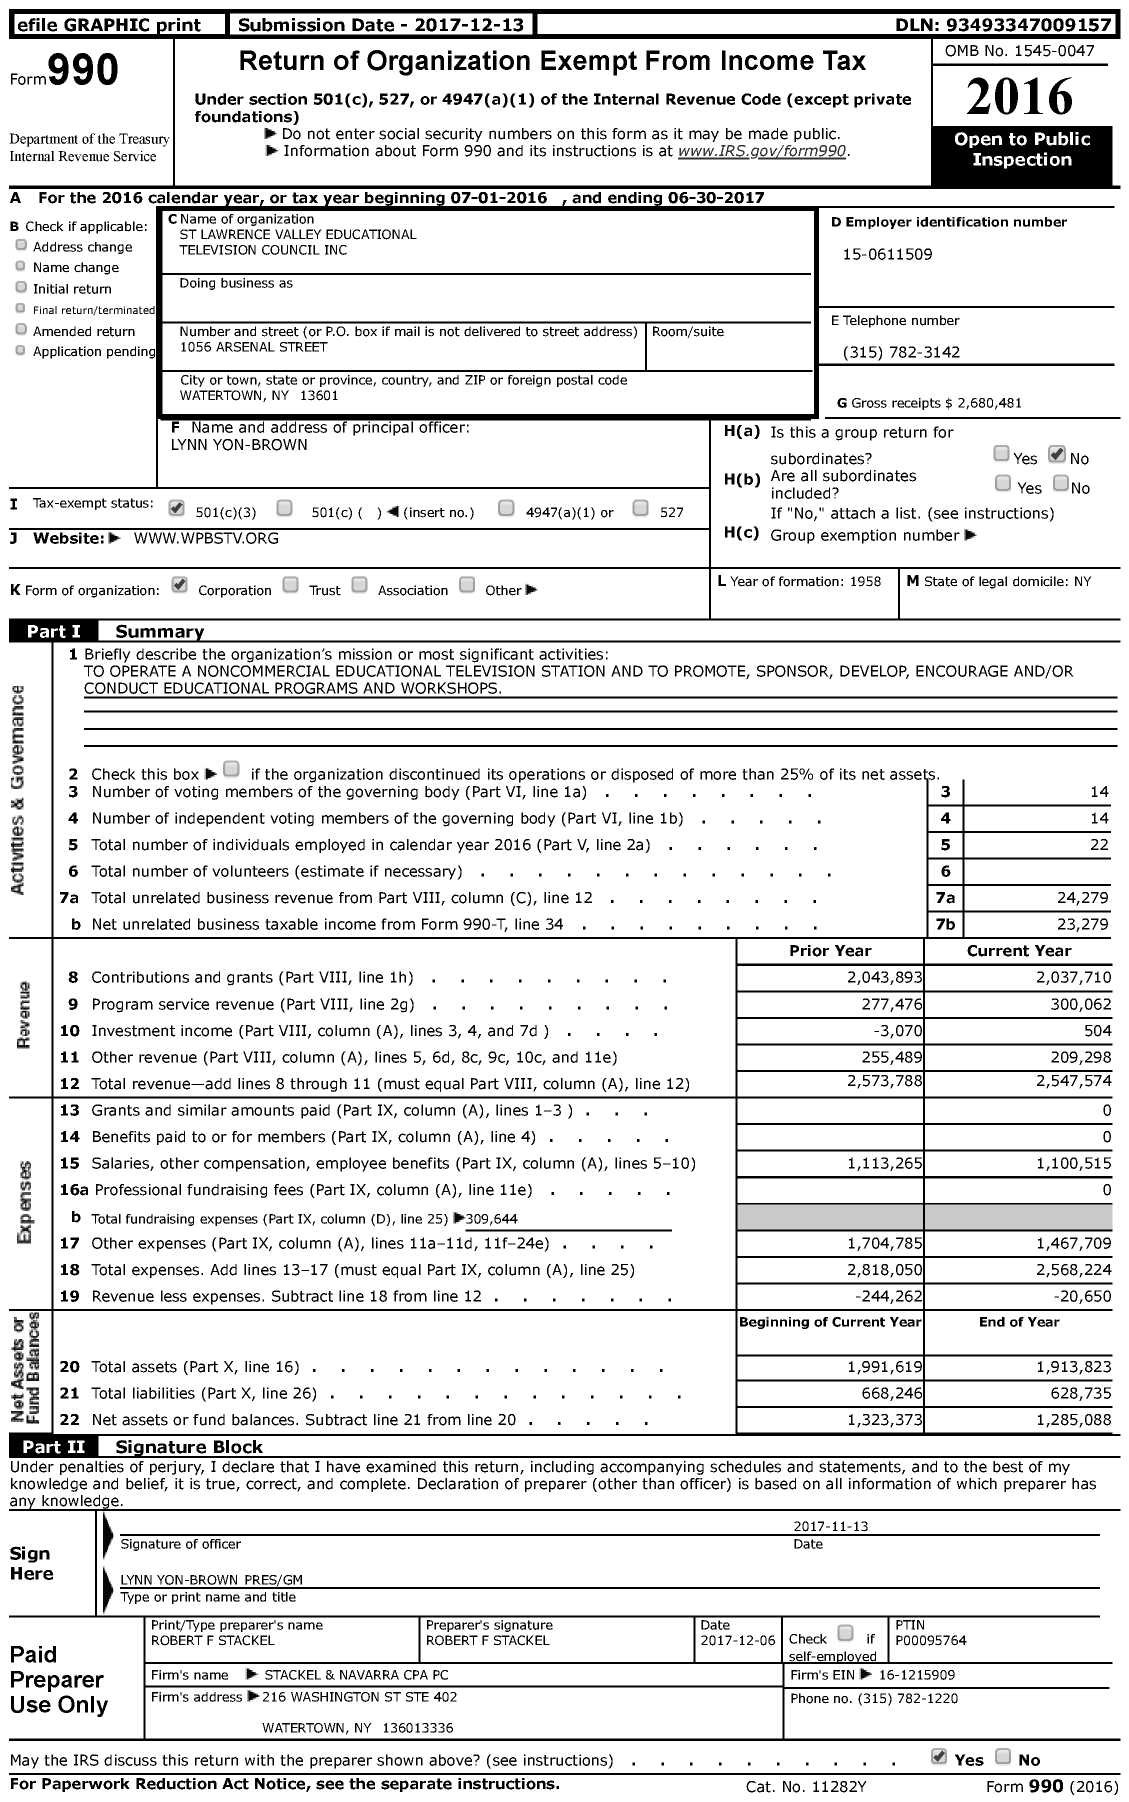 Image of first page of 2016 Form 990 for Wpbs-DT